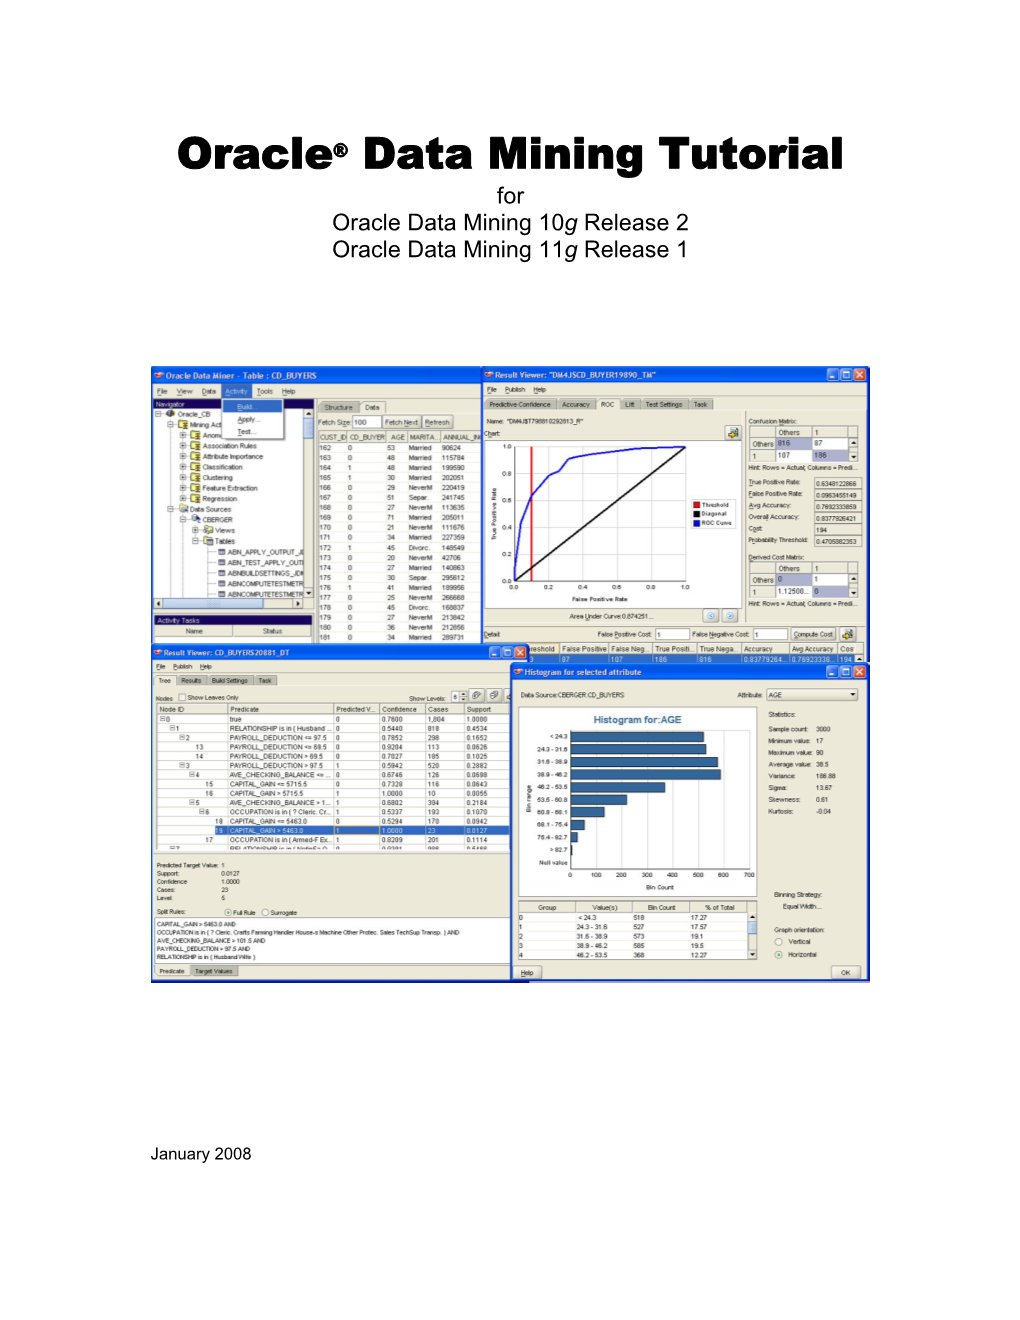 Oracle® Data Mining Tutorial for Oracle Data Mining 10G Release 2 Oracle Data Mining 11G Release 1